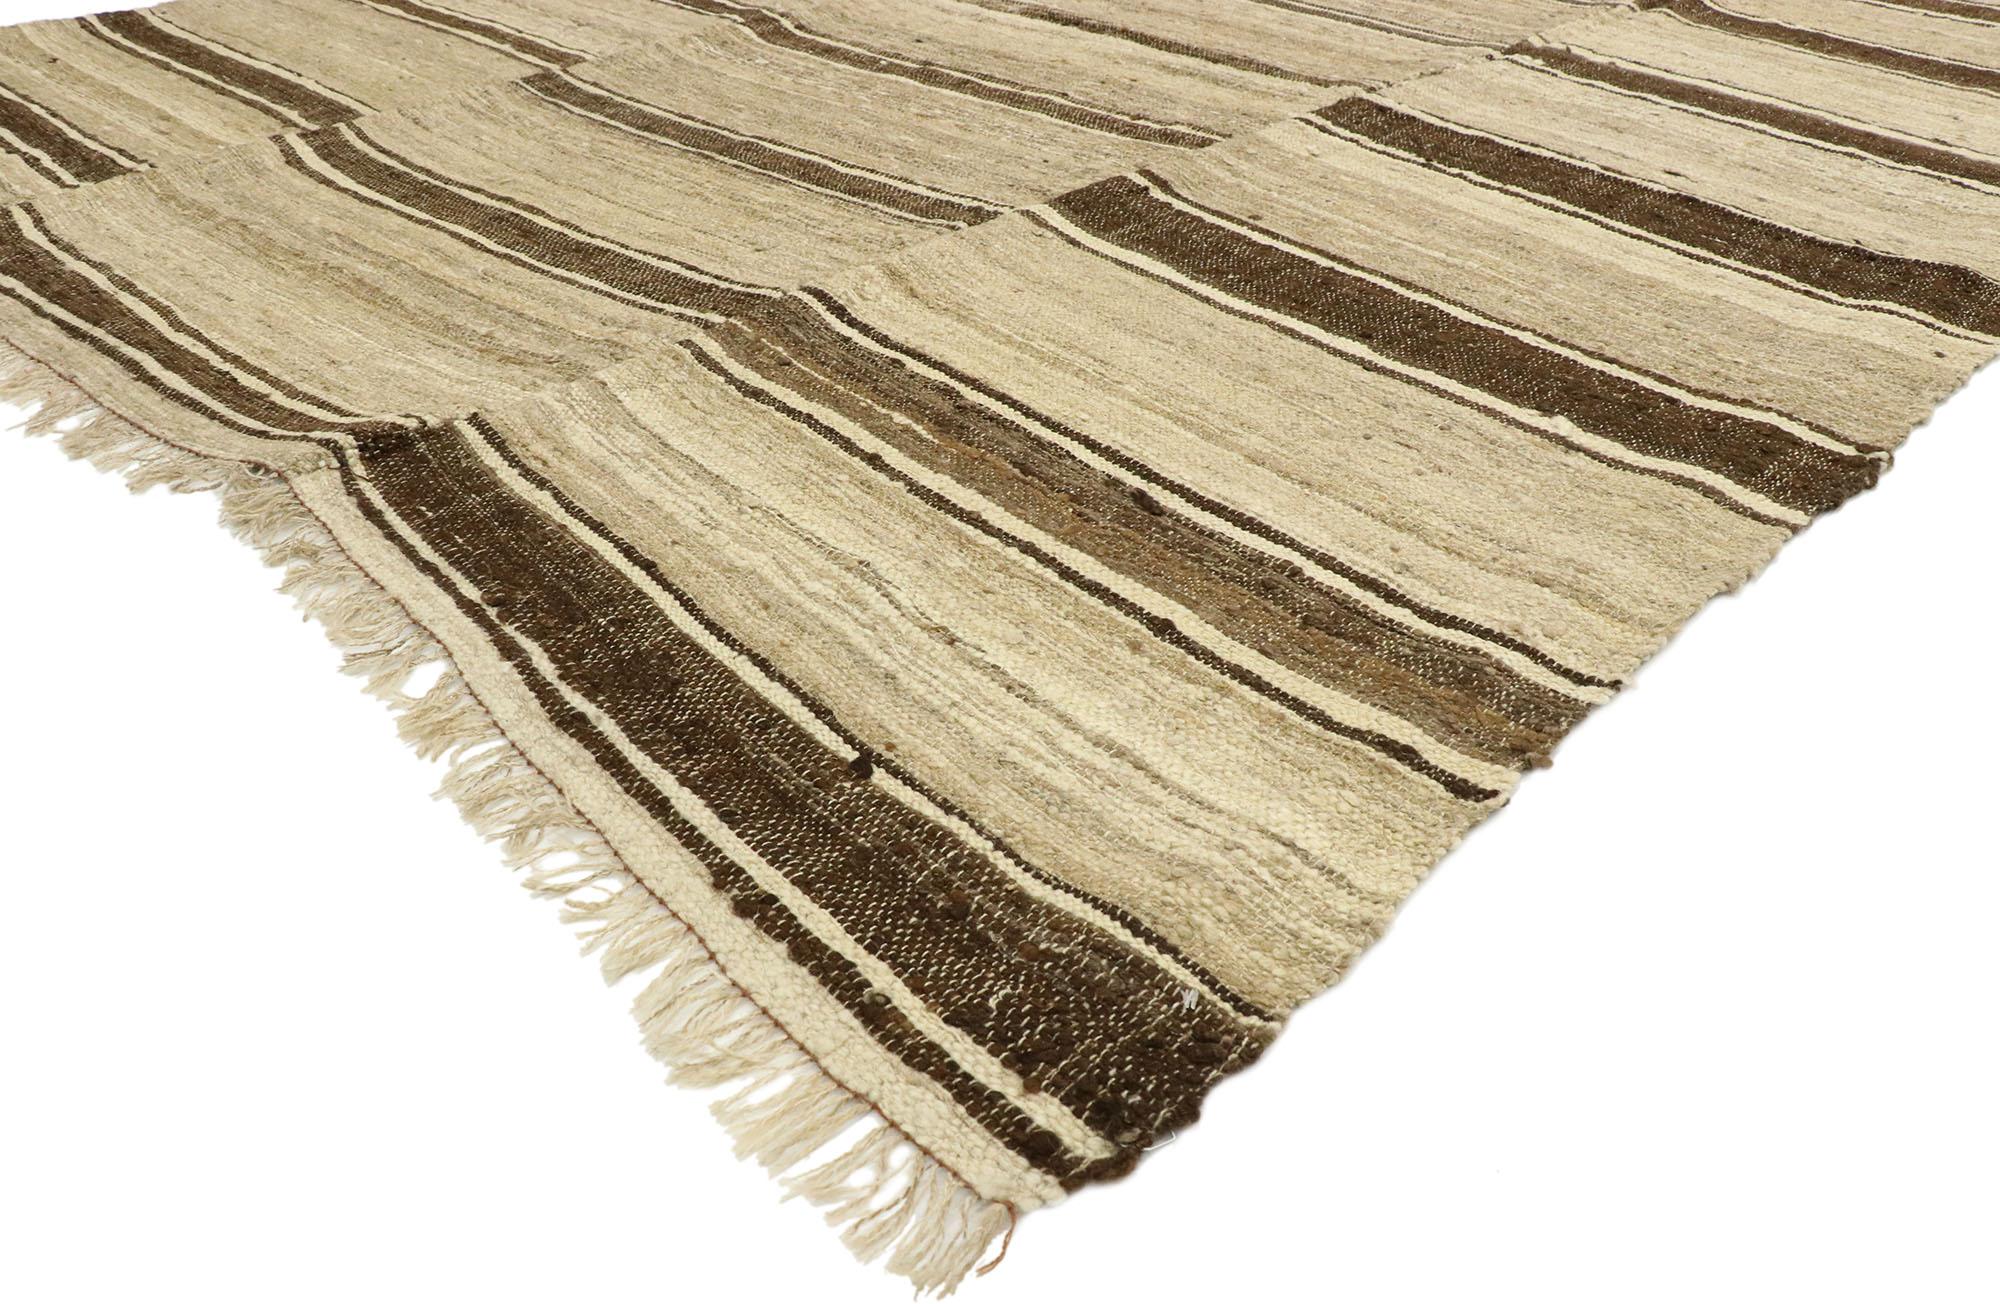 76398, vintage Persian Mazandaran Striped Kilim rug with Mid-Century Modern style. Reminiscent of an exotic journey and worldly sophistication, this handwoven wool vintage Persian Mazandaran striped Kilim rug beautifully embodies a breezy British